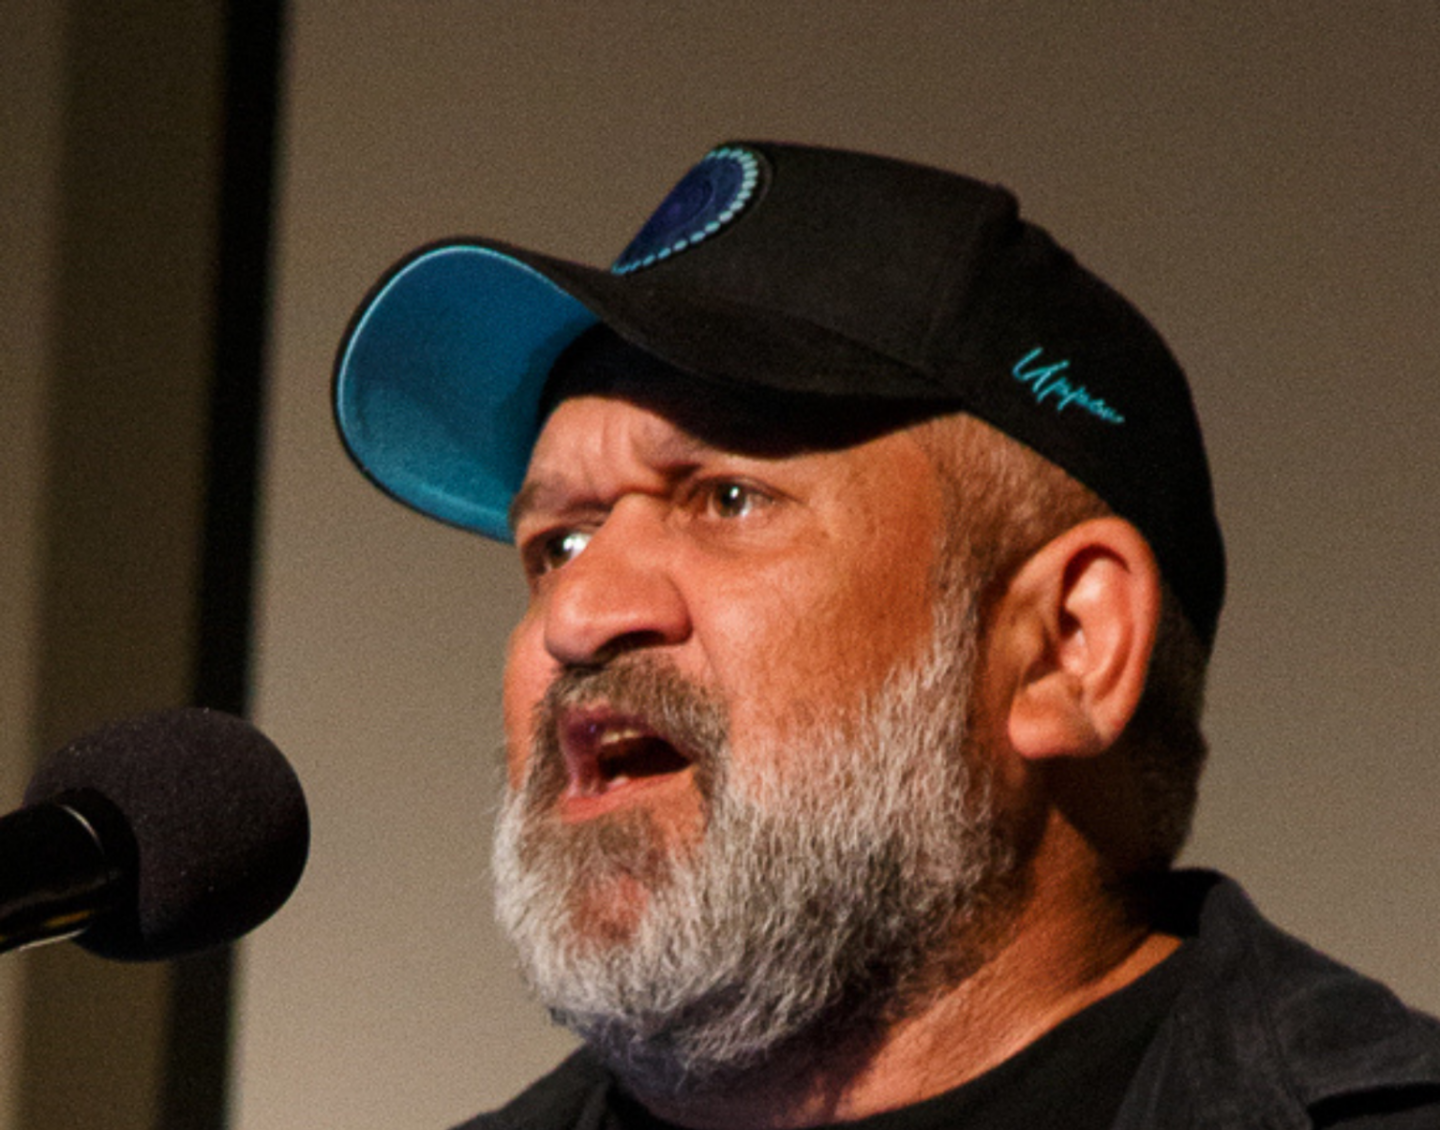 A man with a black cap and grey beard, wearing a shirt emblazoned with the Aboriginal flag. He is speaking into a microphone